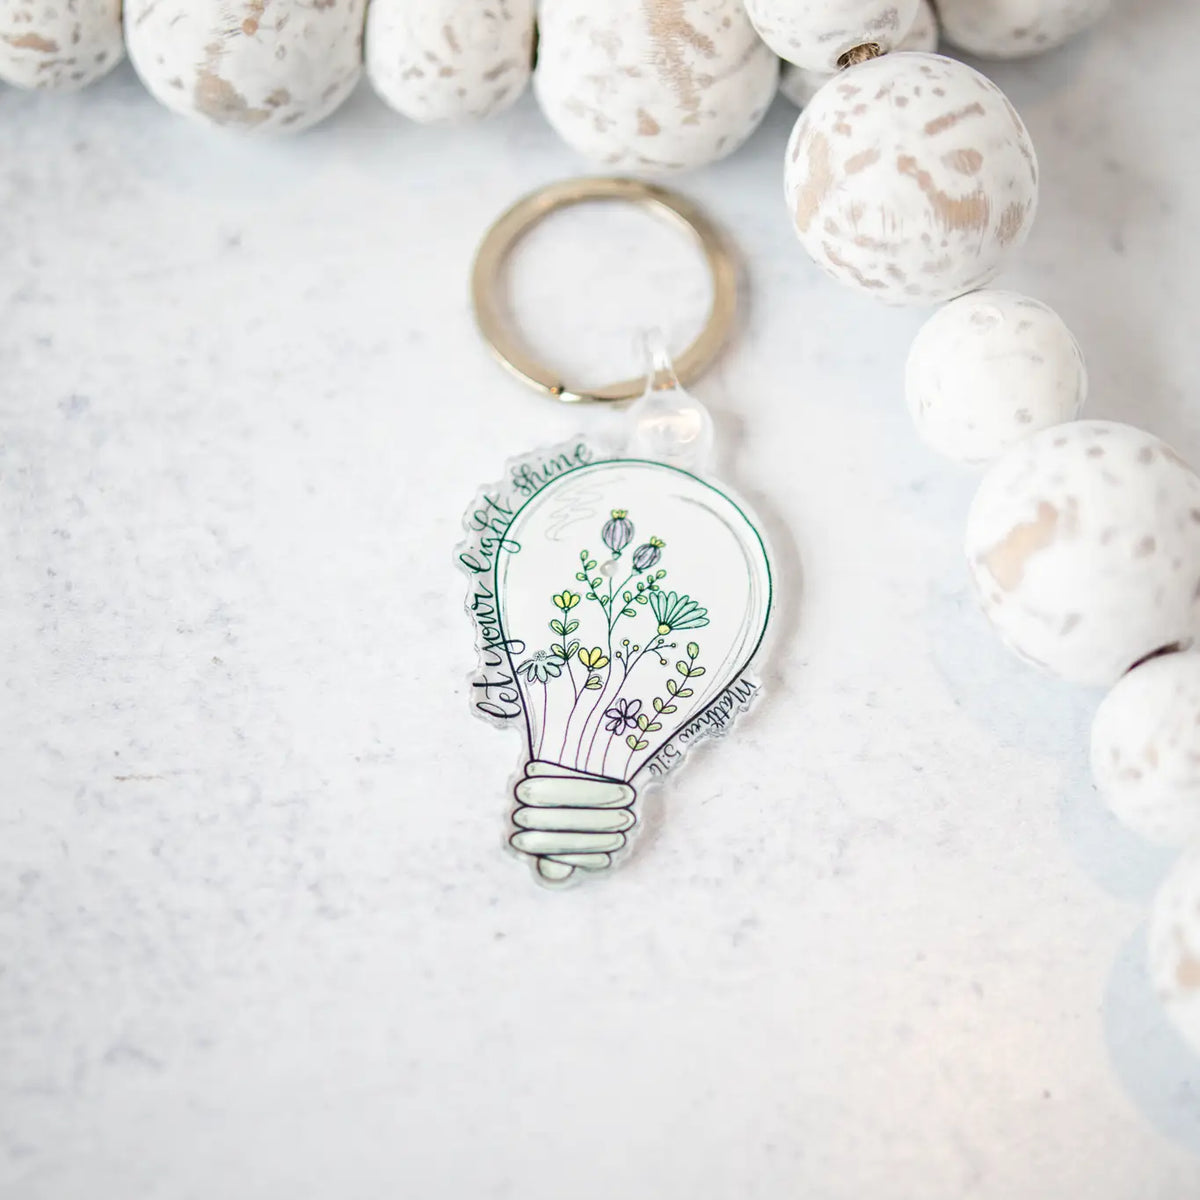 Let Your Light Shine, Keychain